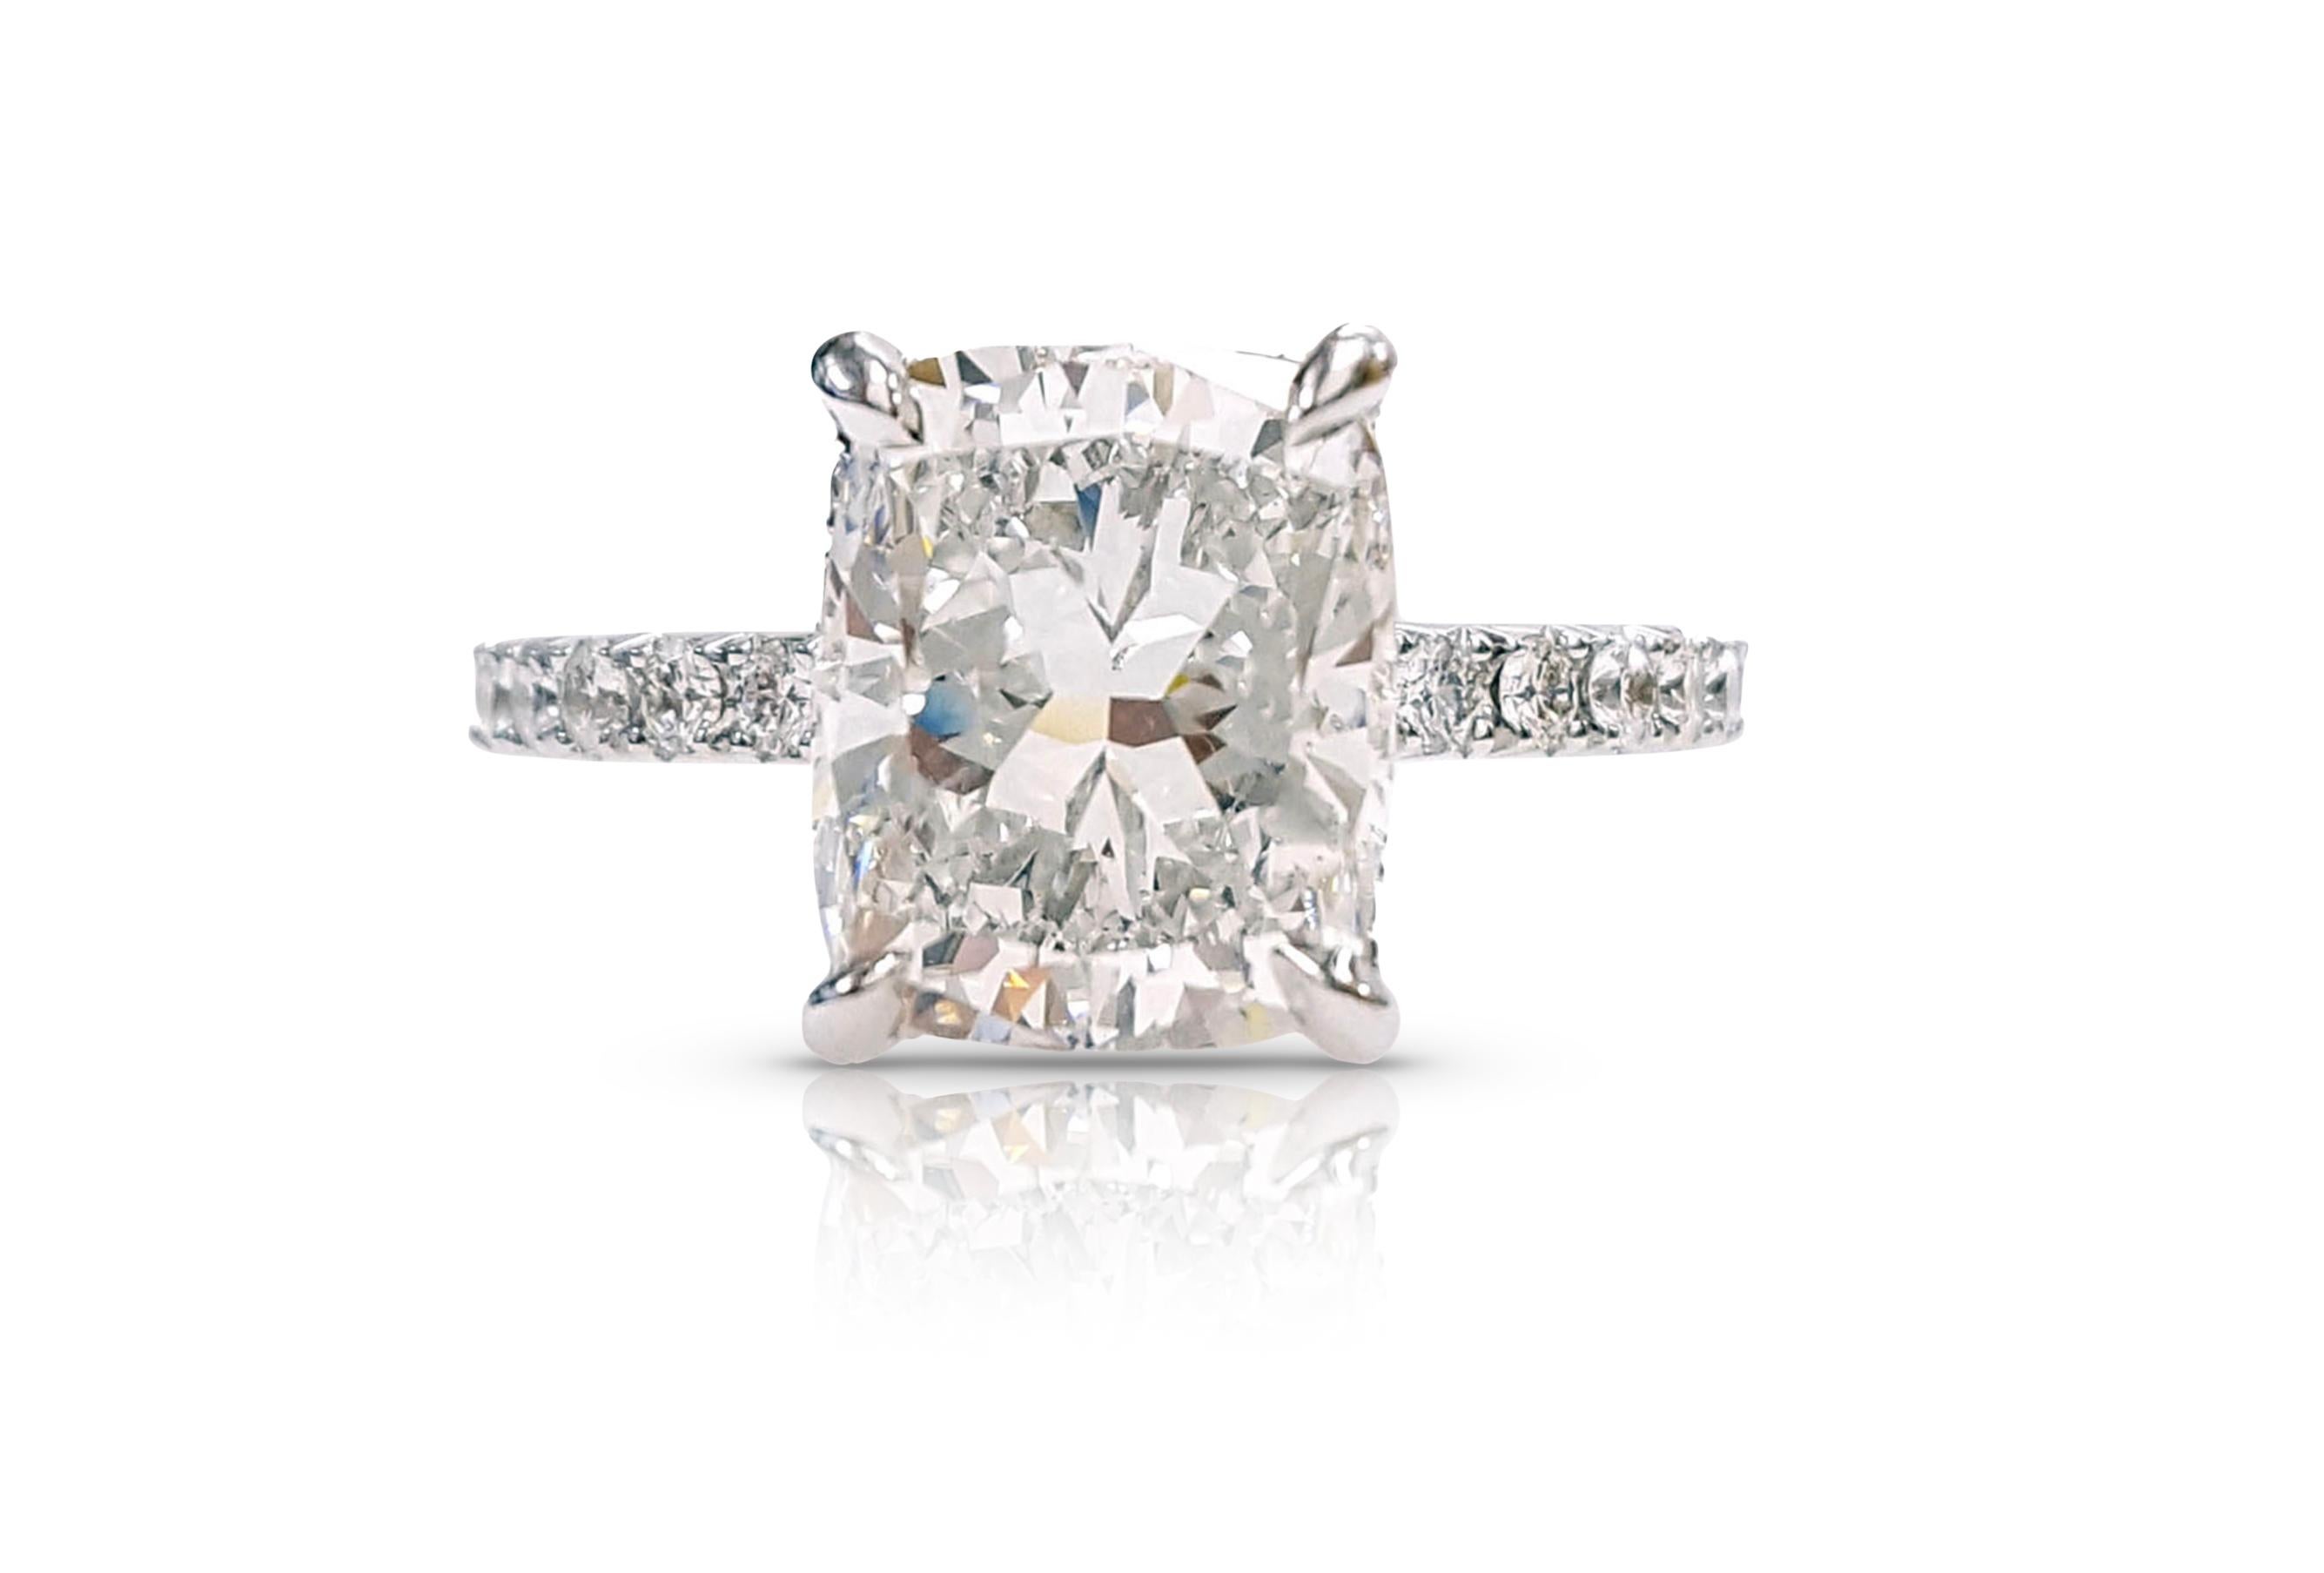 A classic 3.01 carat Cushion cut diamond, Engagement Ring, certified by GIA as F color, SI2 clarity. The classic design brings out the beauty of the center stone with the surrounding 42 pavé round brilliant white diamonds, which give the shimmering